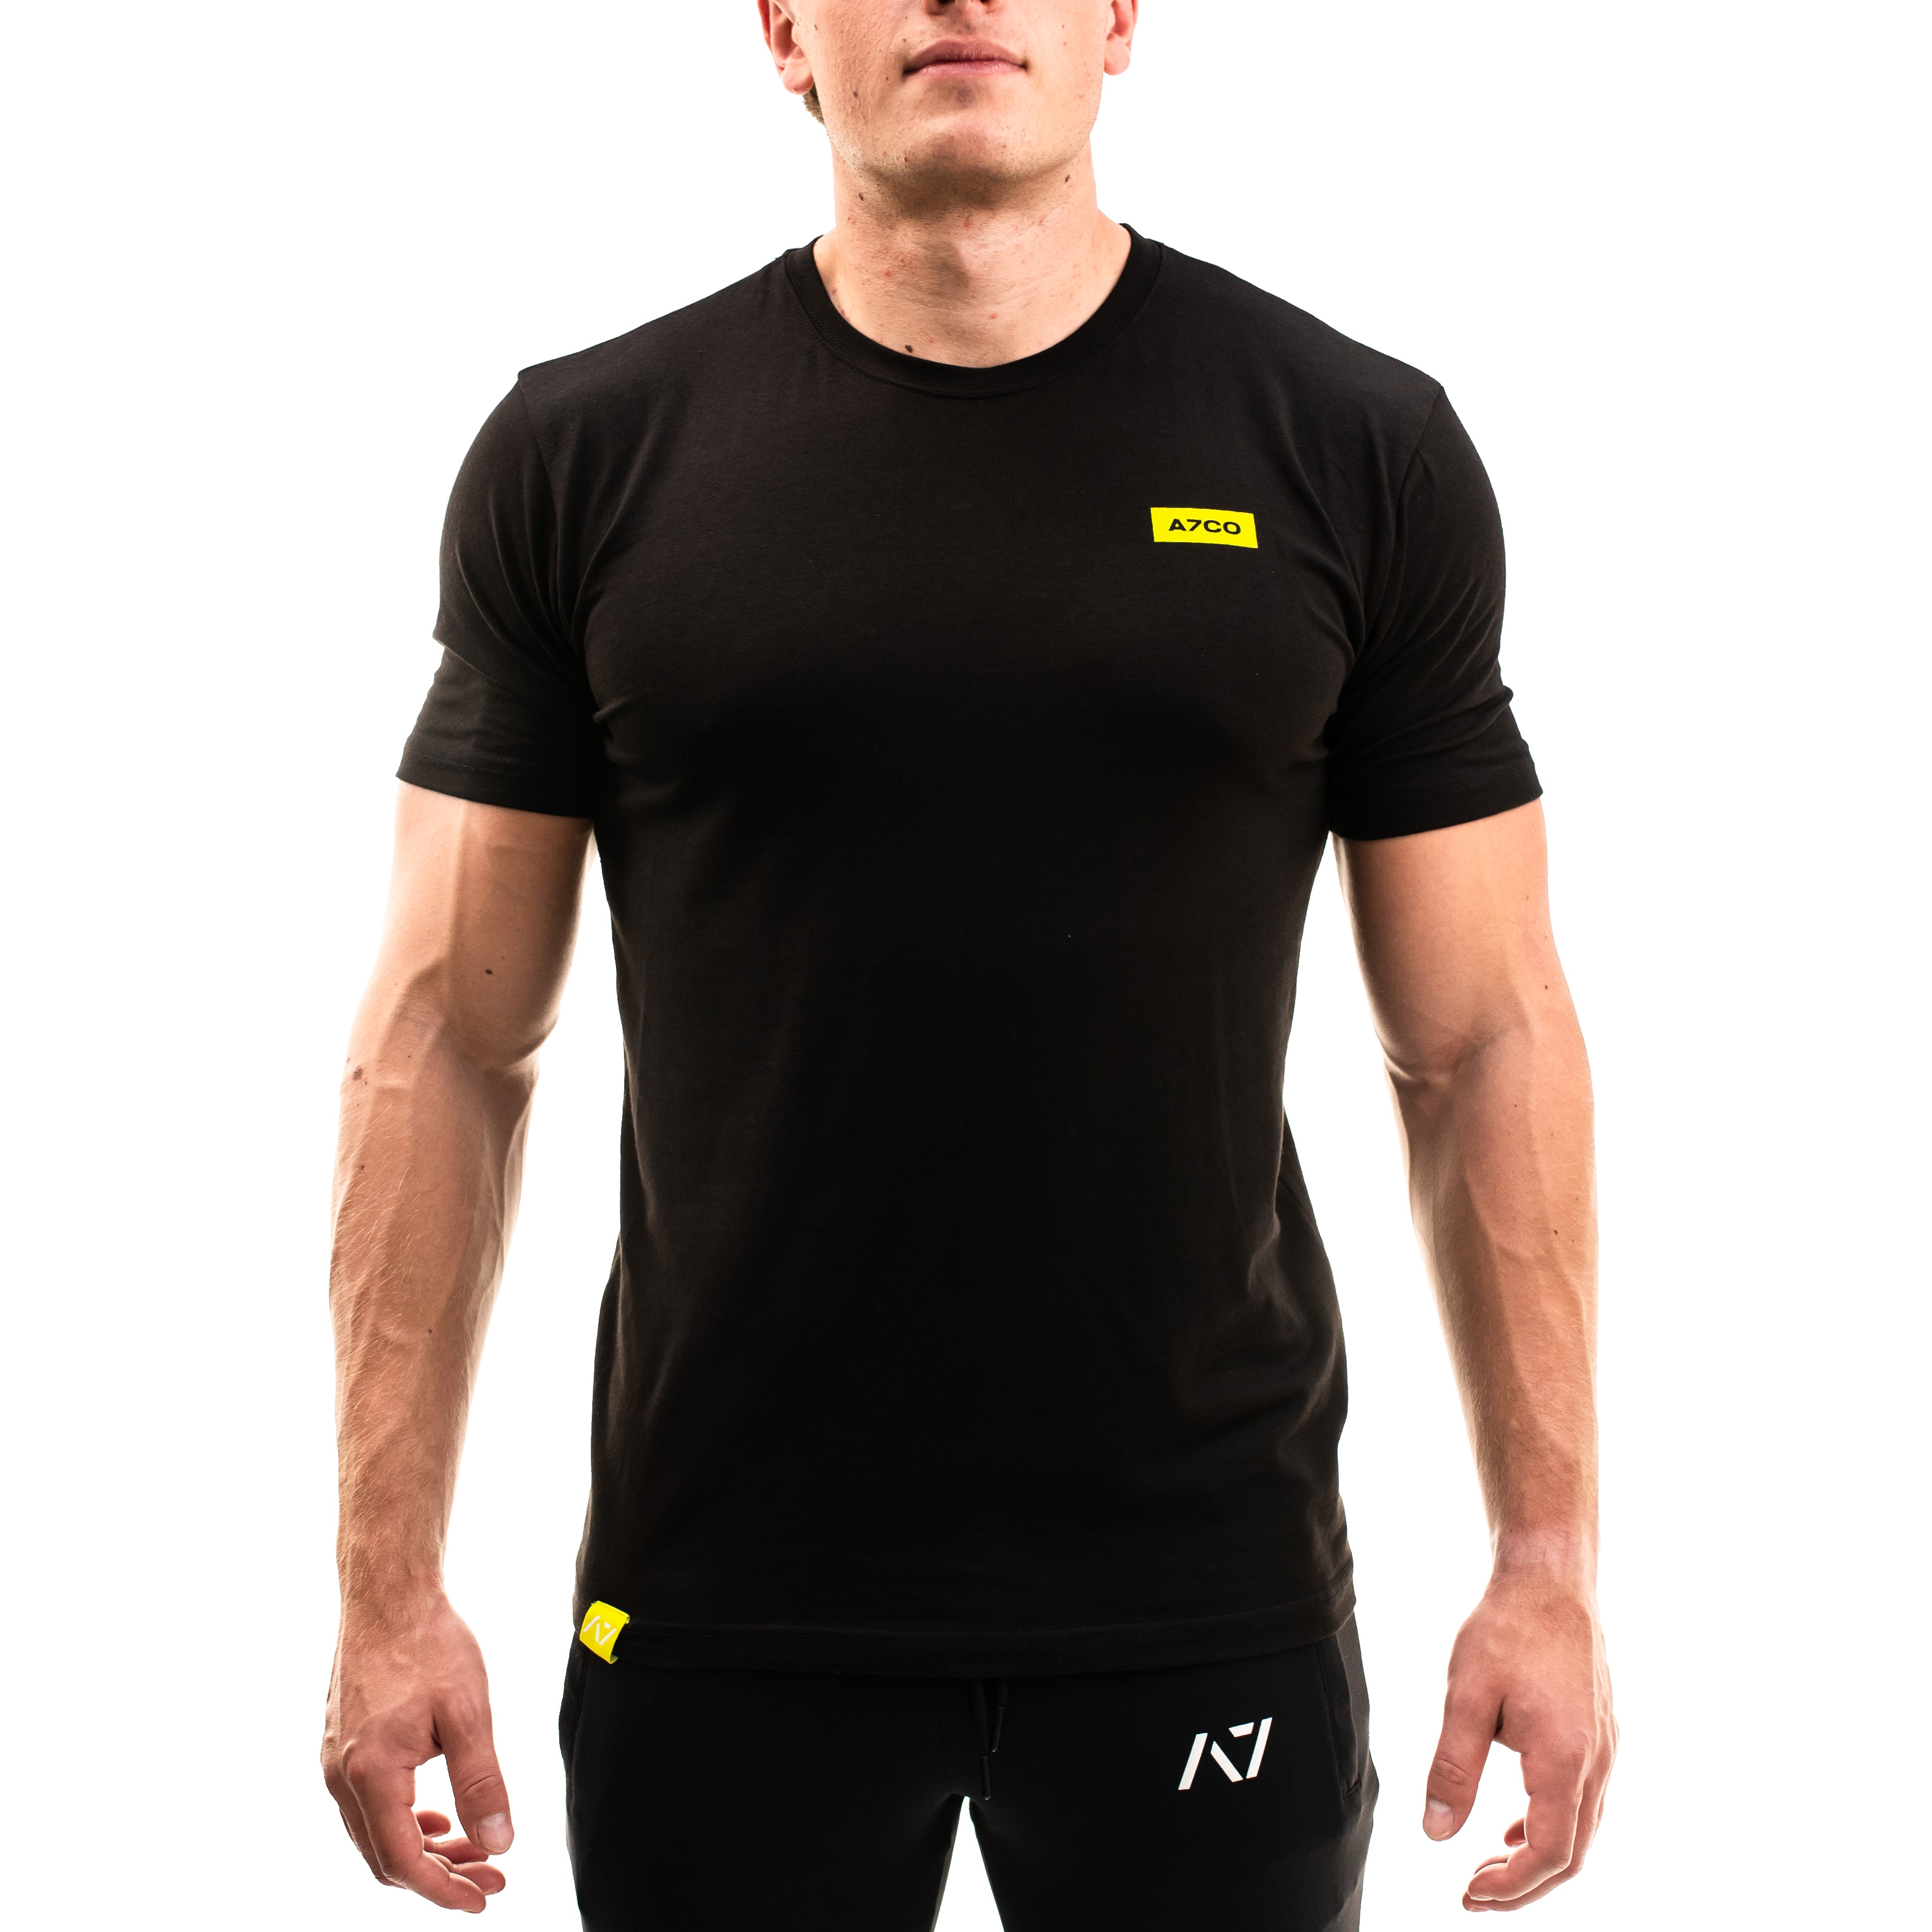 Gridlock Non Bar Grip T-Shirt is perfect for in and out of the gym. Purchase Gridlock Non Bar Grip t shirt from A7 UK. Purchase Gridlock Shirt in Europe from A7 Europe Best gymwear shipping to UK and Europe from A7 UK. Gridlock is our newest Non Bar Grip Design. The best Powerlifting apparel for all your workouts. Available in UK and Europe including France, Italy, Germany, Sweden and Poland.